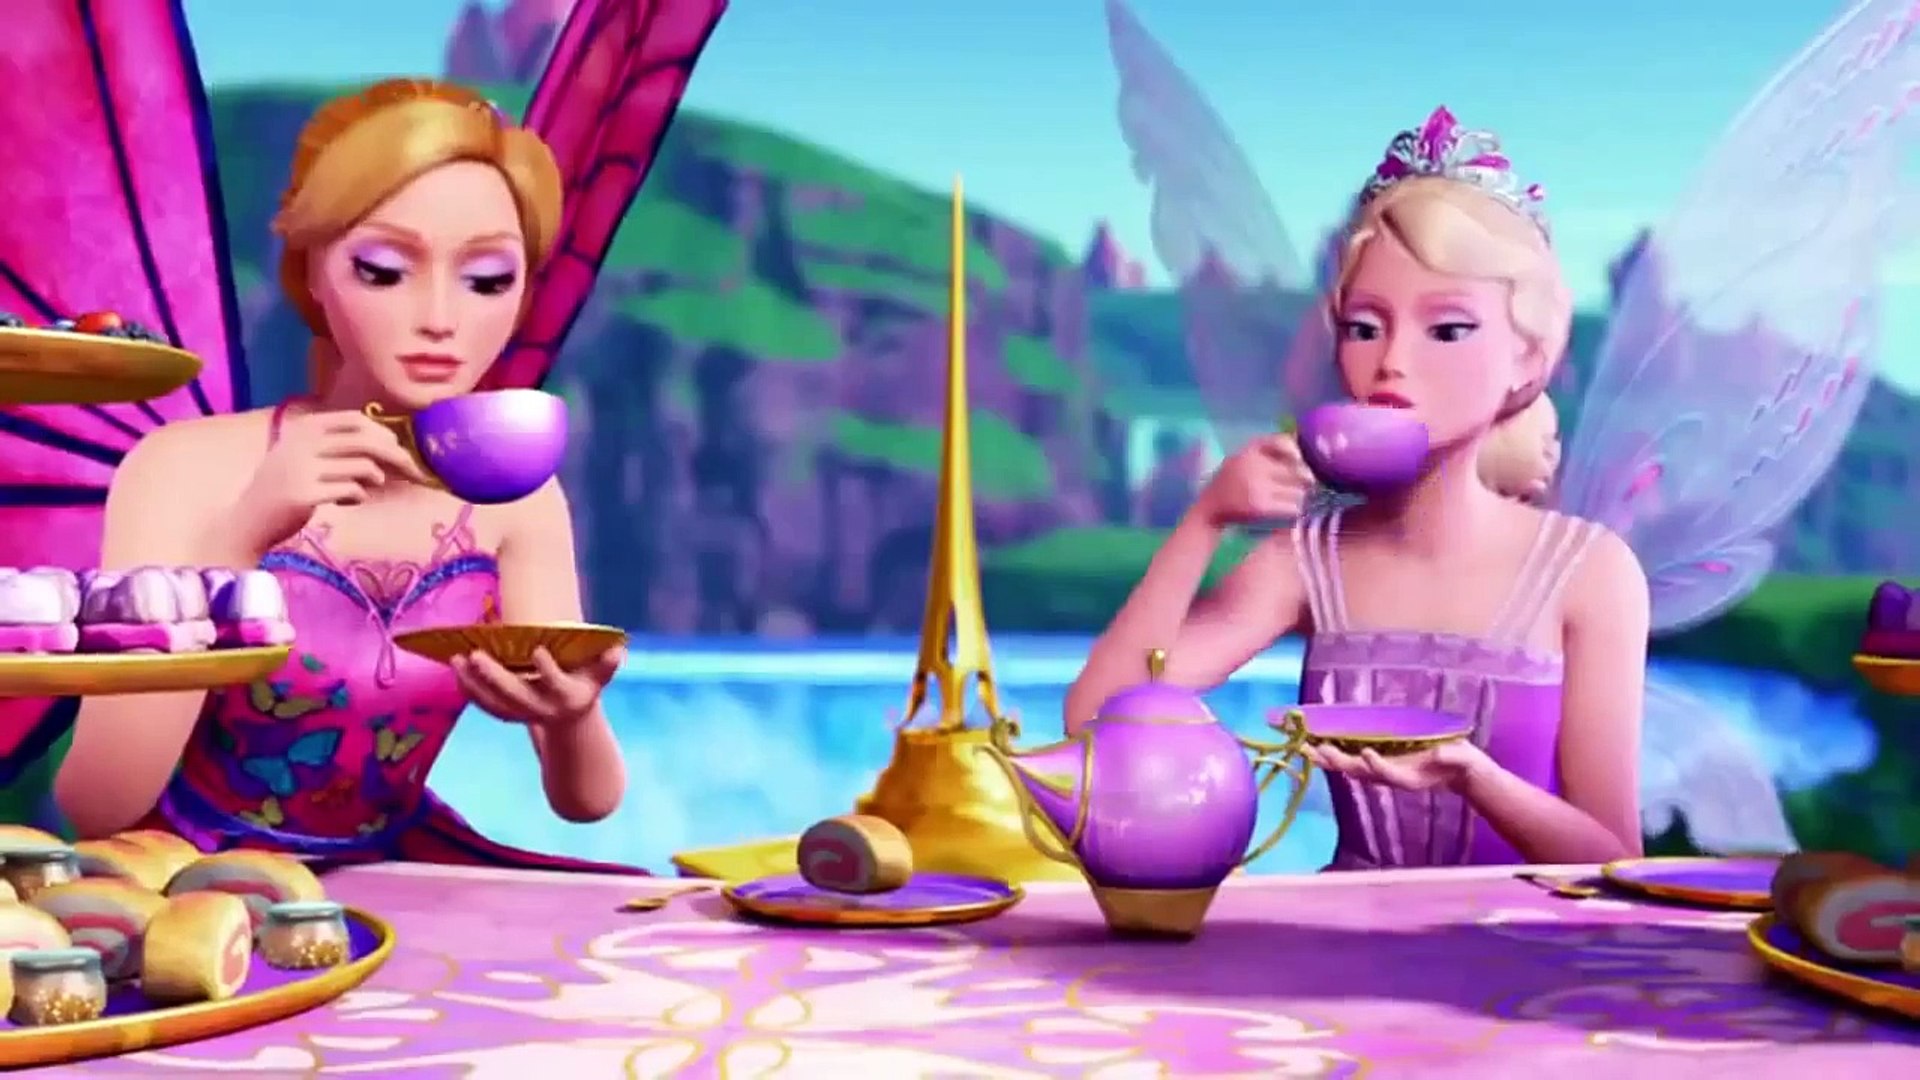 Barbie the Princess Charm School Barbie Life in the Dreamhouse friends  Pearl story full mo - Dailymotion Video